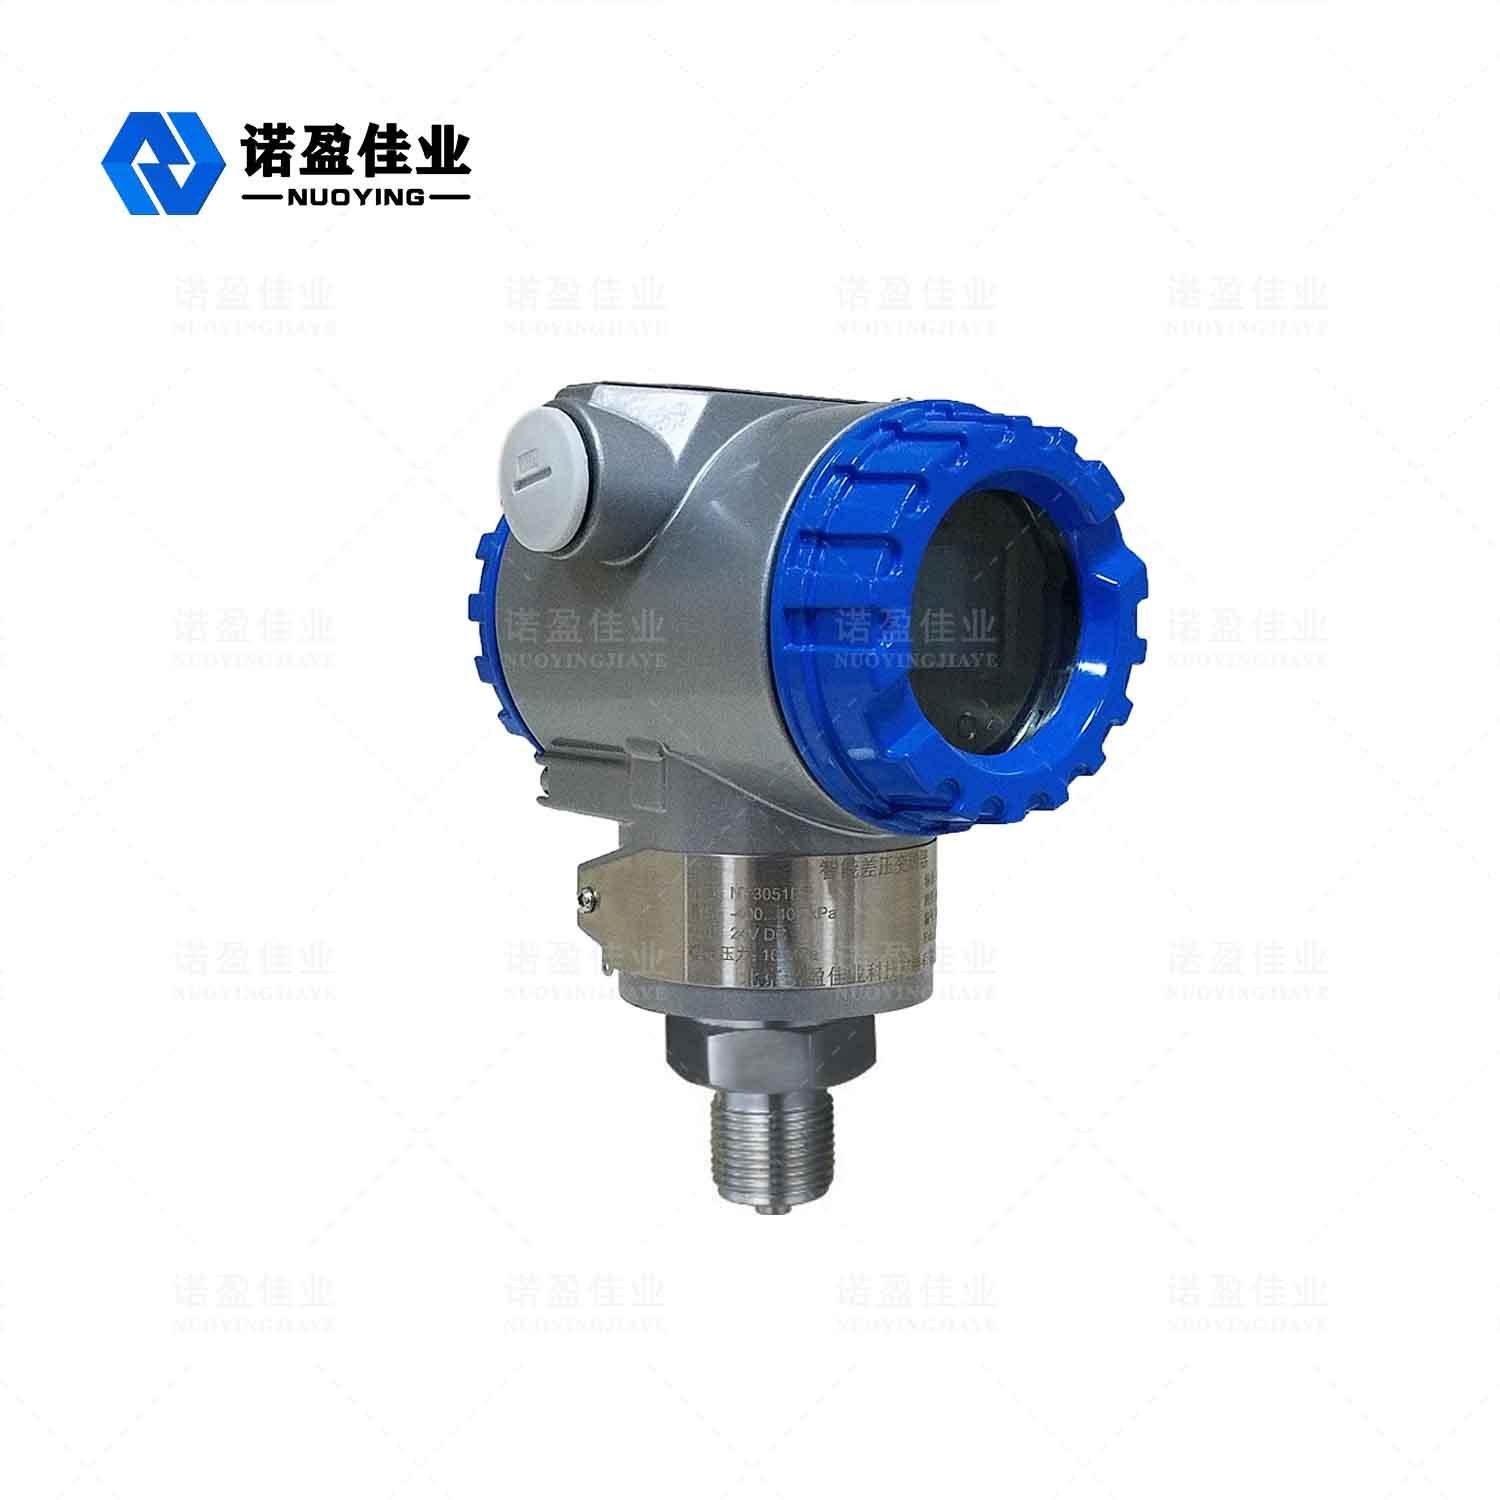 NP-3051 Four Wire High Accuracy Pressure Transmitter 4-20ma 4